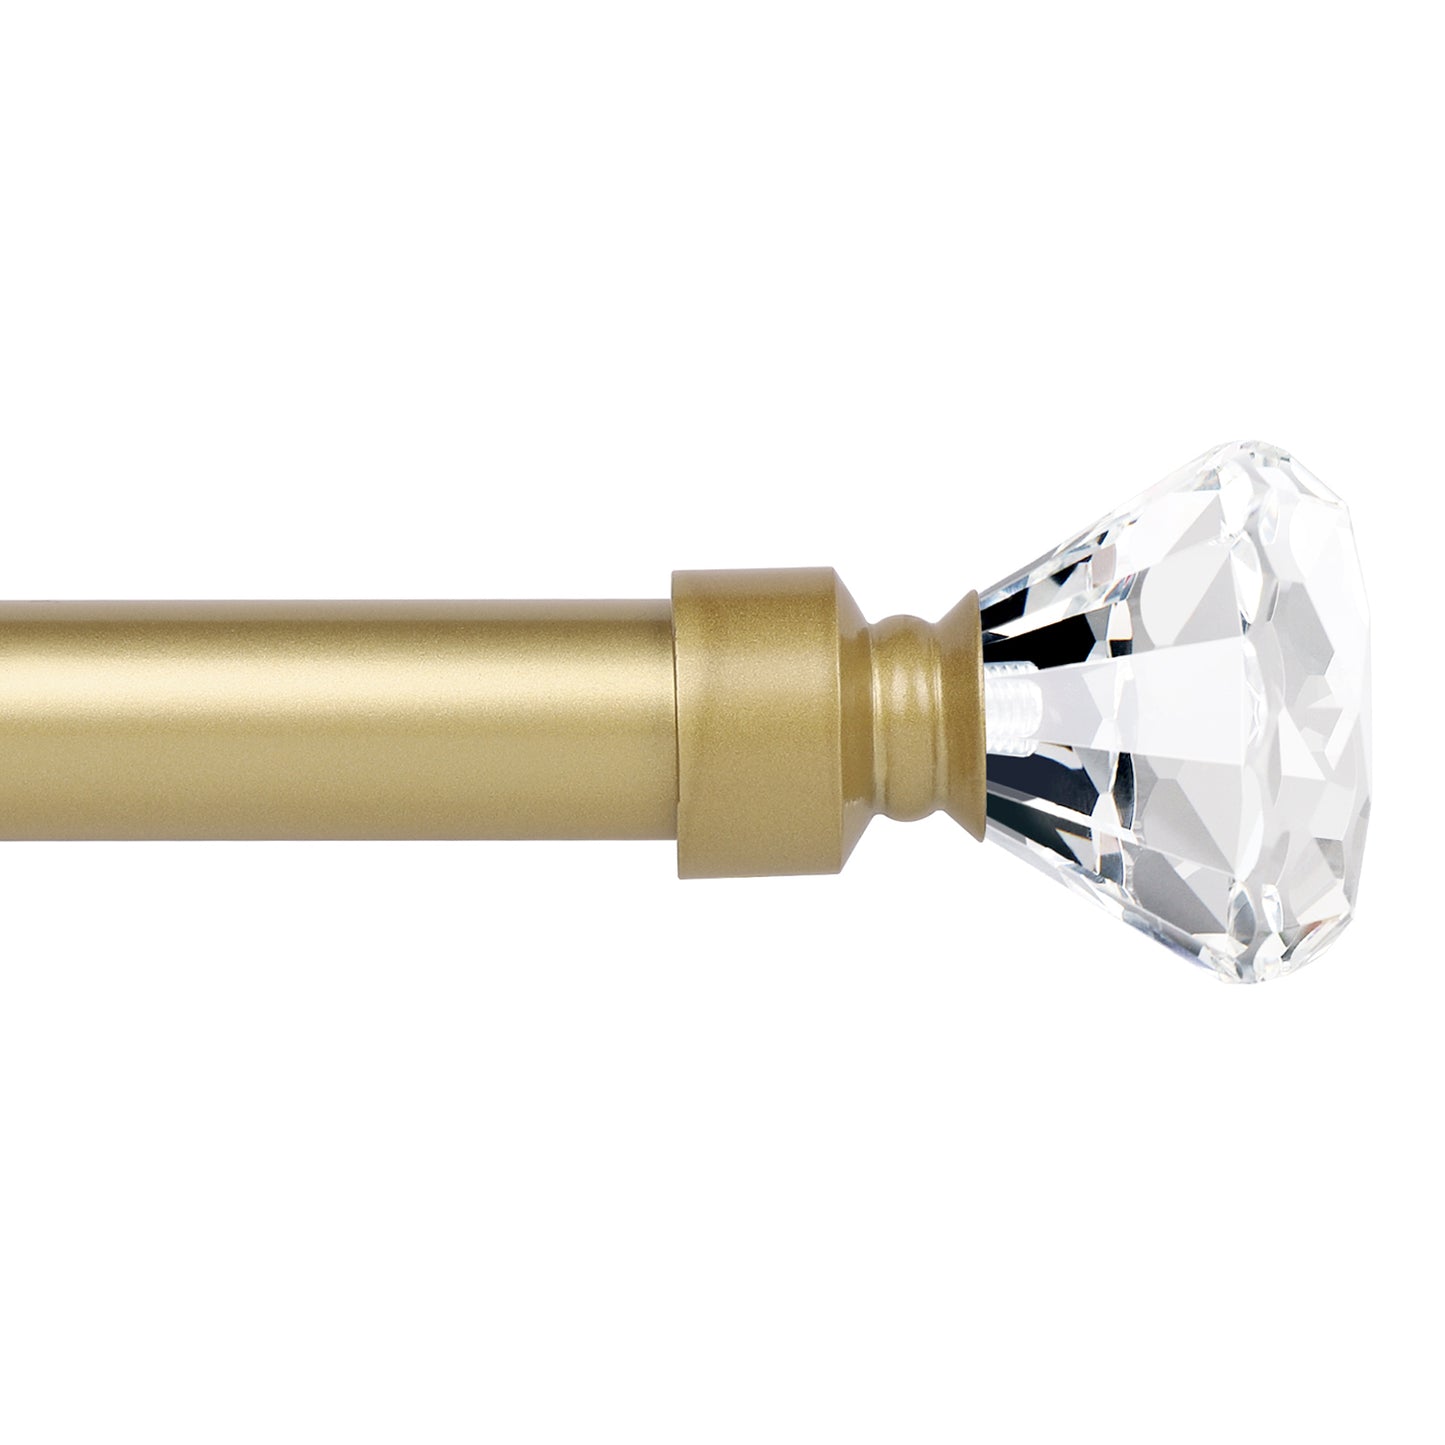 1 Inch Golden Decorative Single Curtain Rod with Crystal Diamond Finials, 22 to 86 Inches